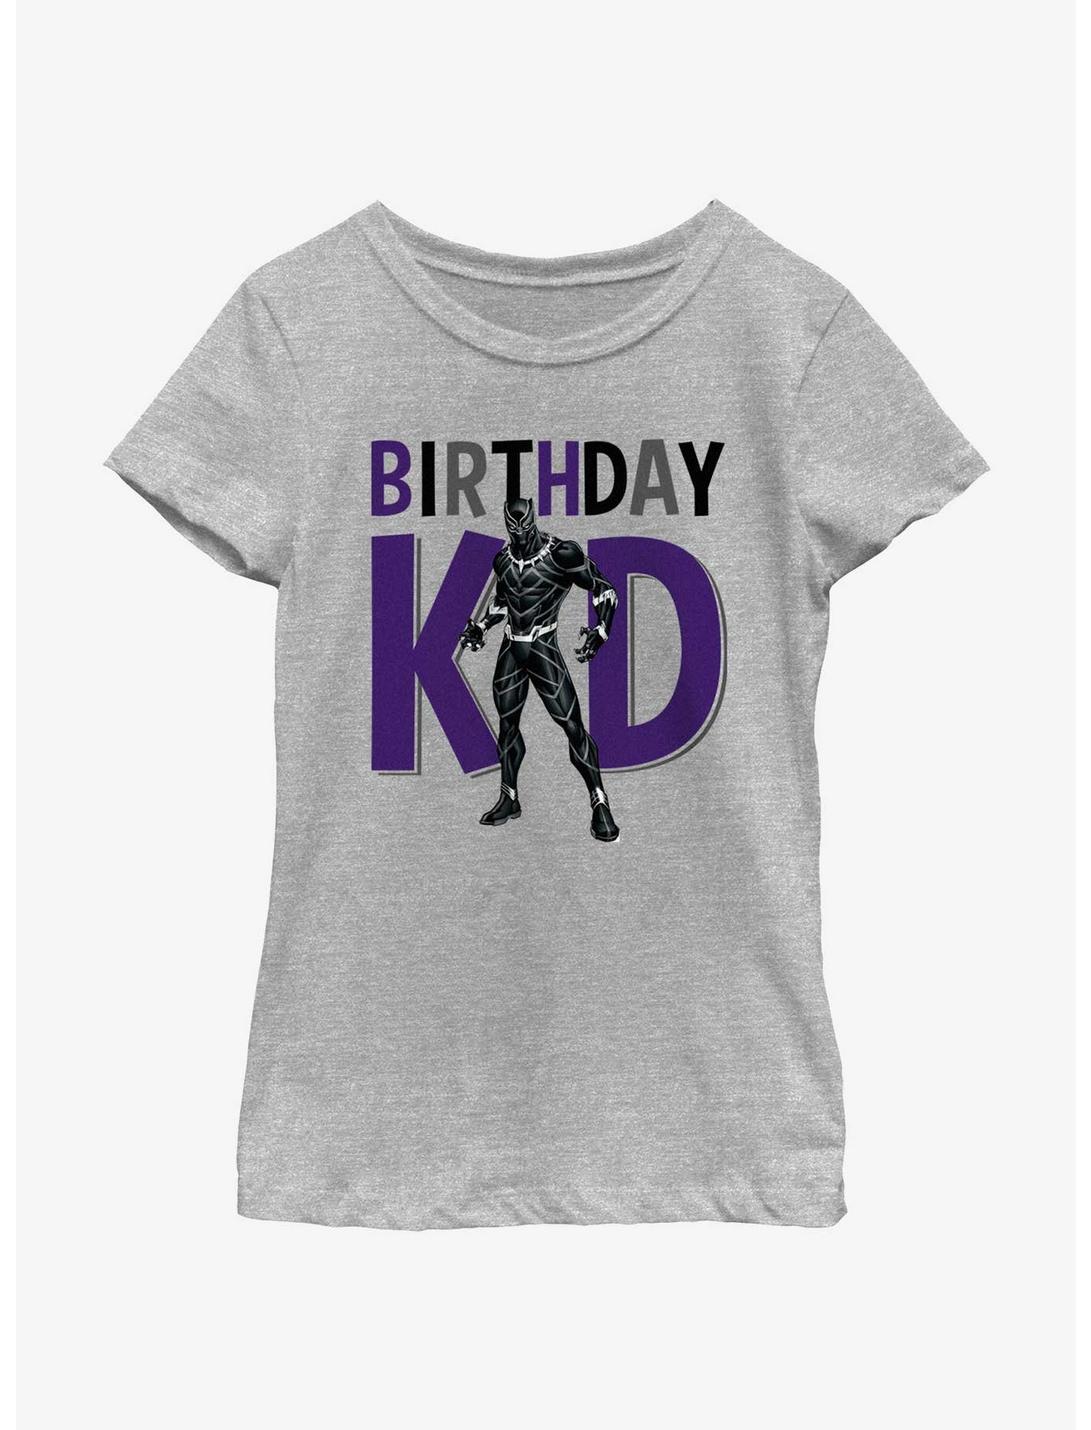 Marvel Avengers Birthday Kid Black Panther Youth Girls T-Shirt, ATH HTR, hi-res